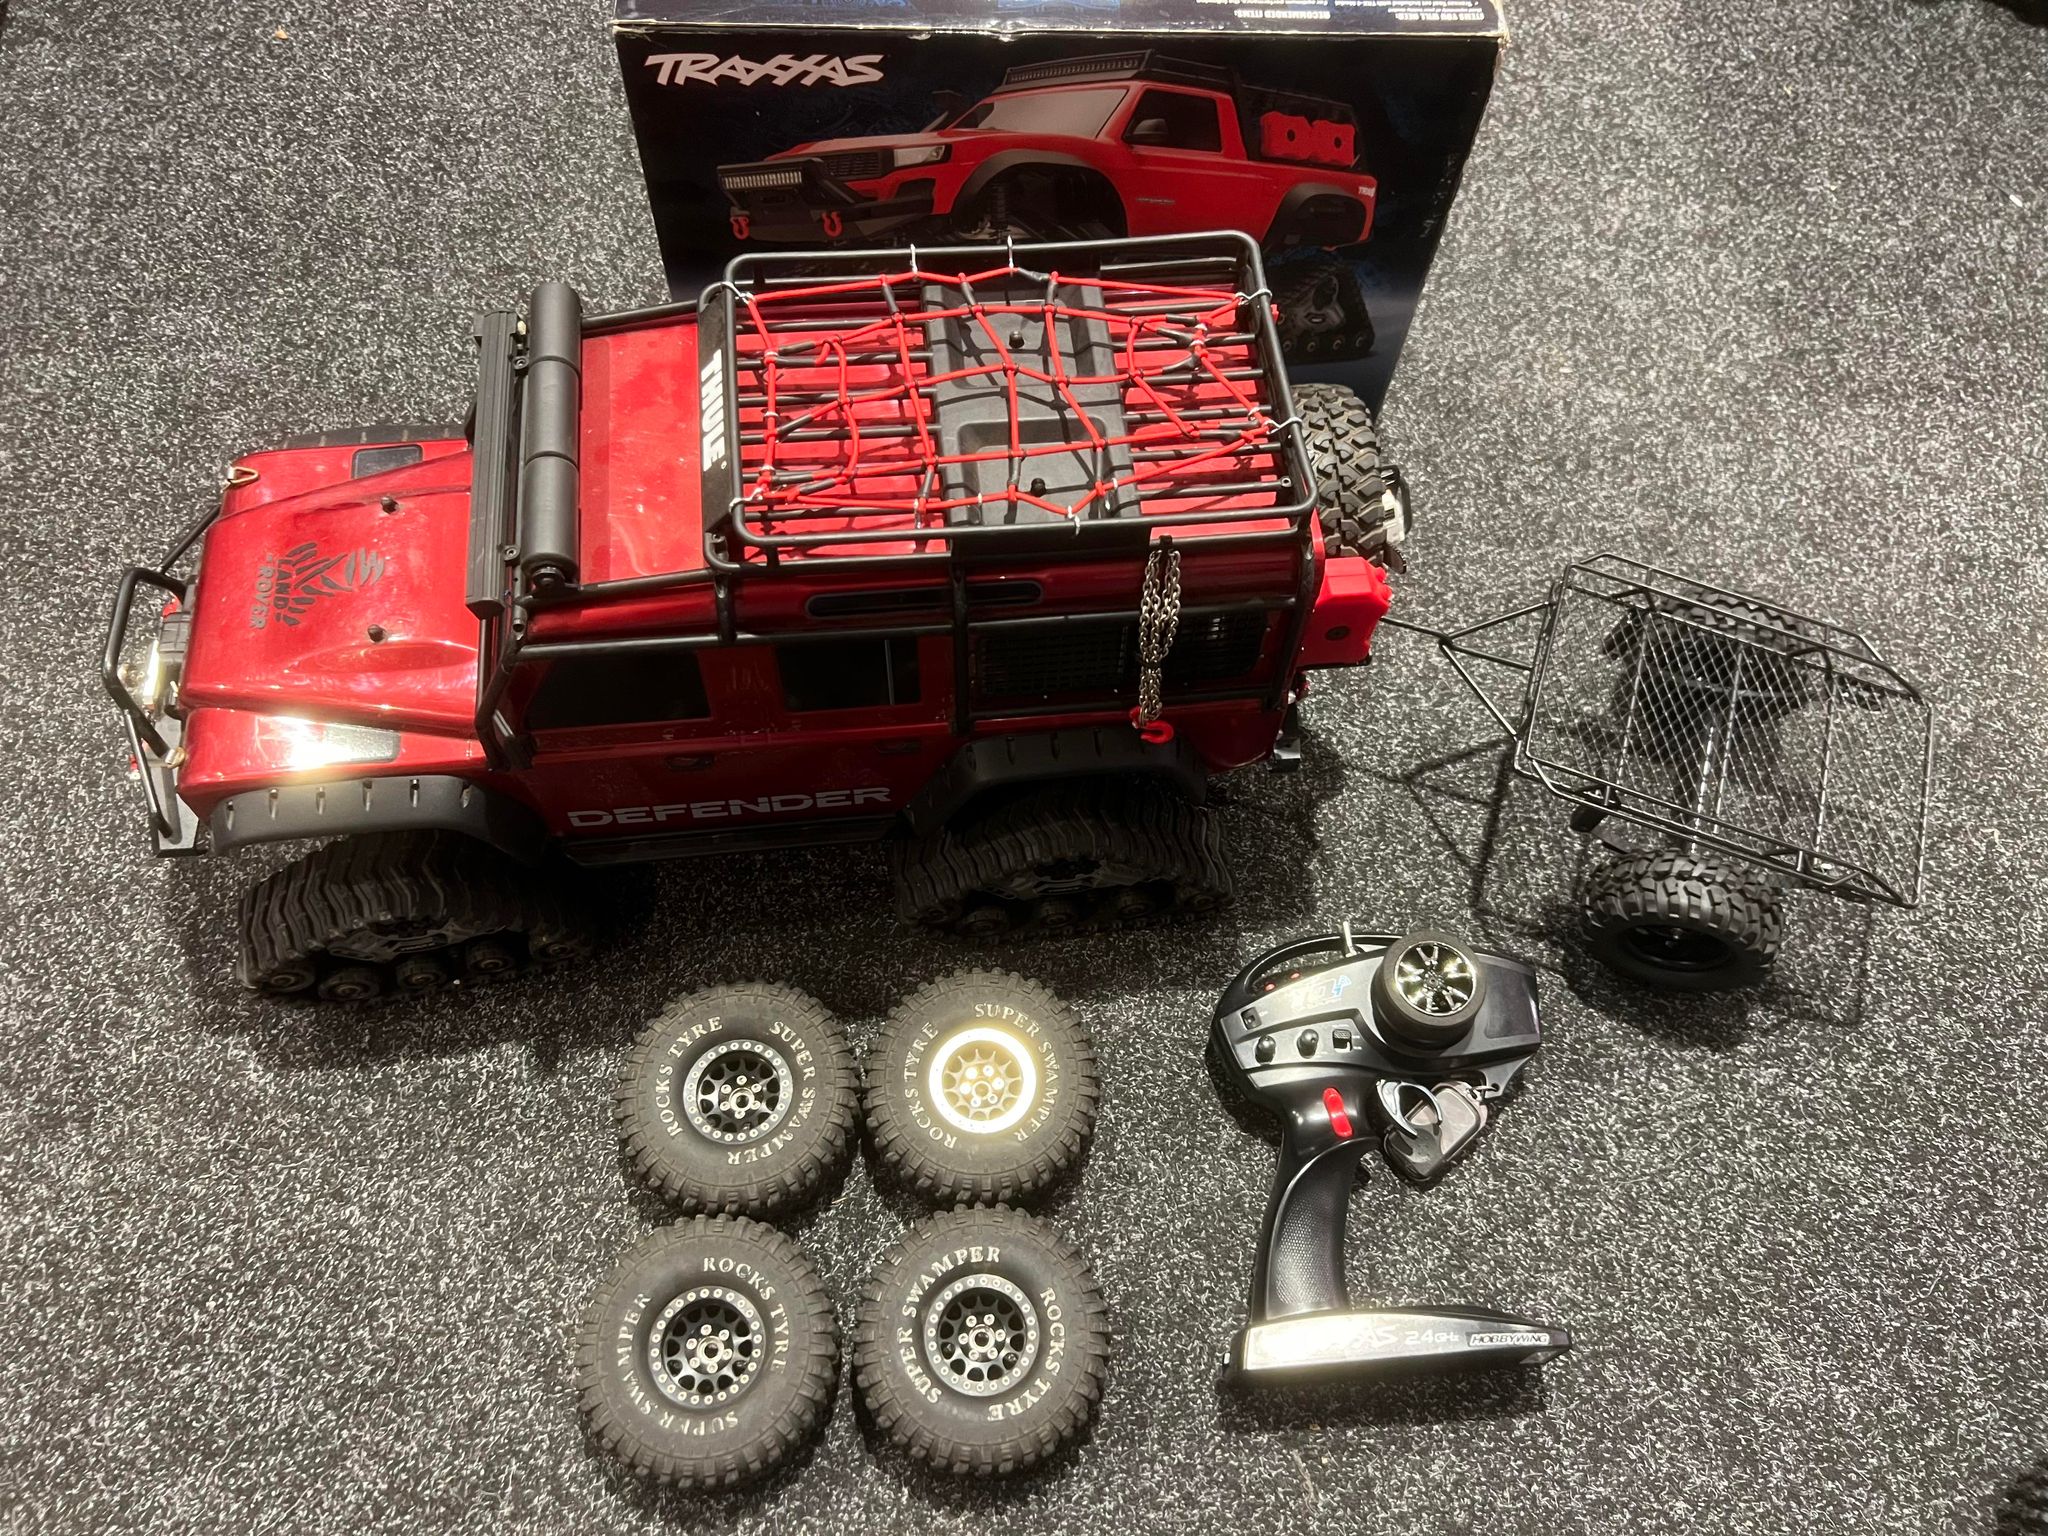 Blackout Crawler With The Traxxas TRX-4 Land Rover Defender [VIDEO